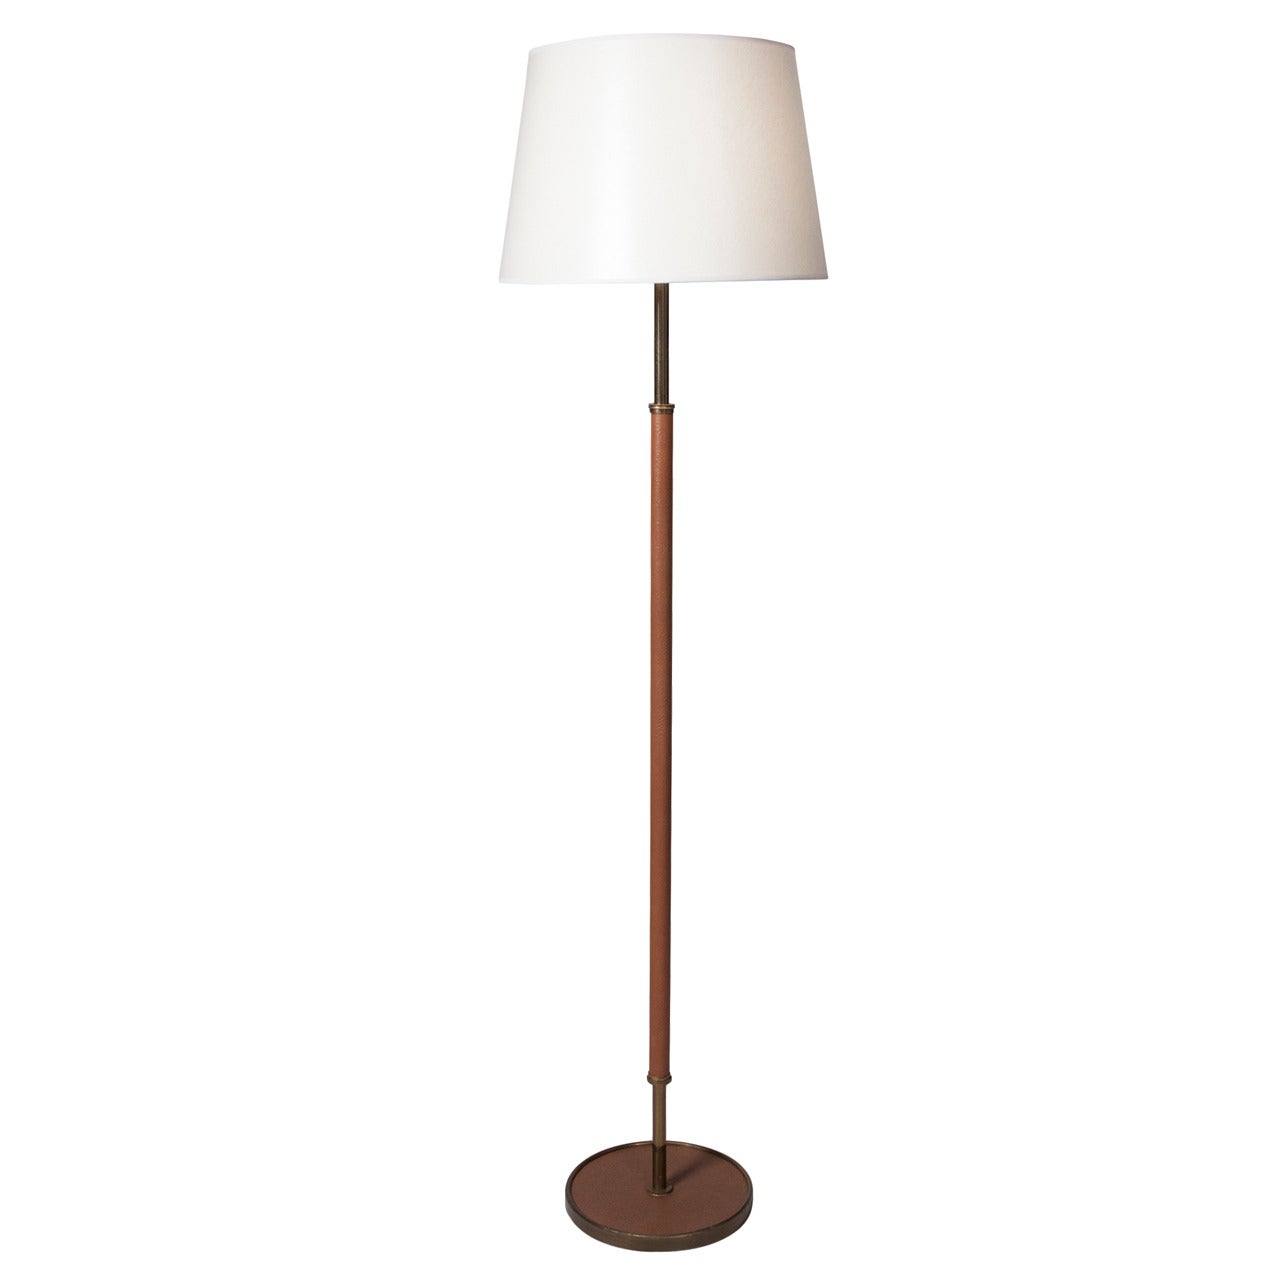 50s French Textured Leather Floor Lamp